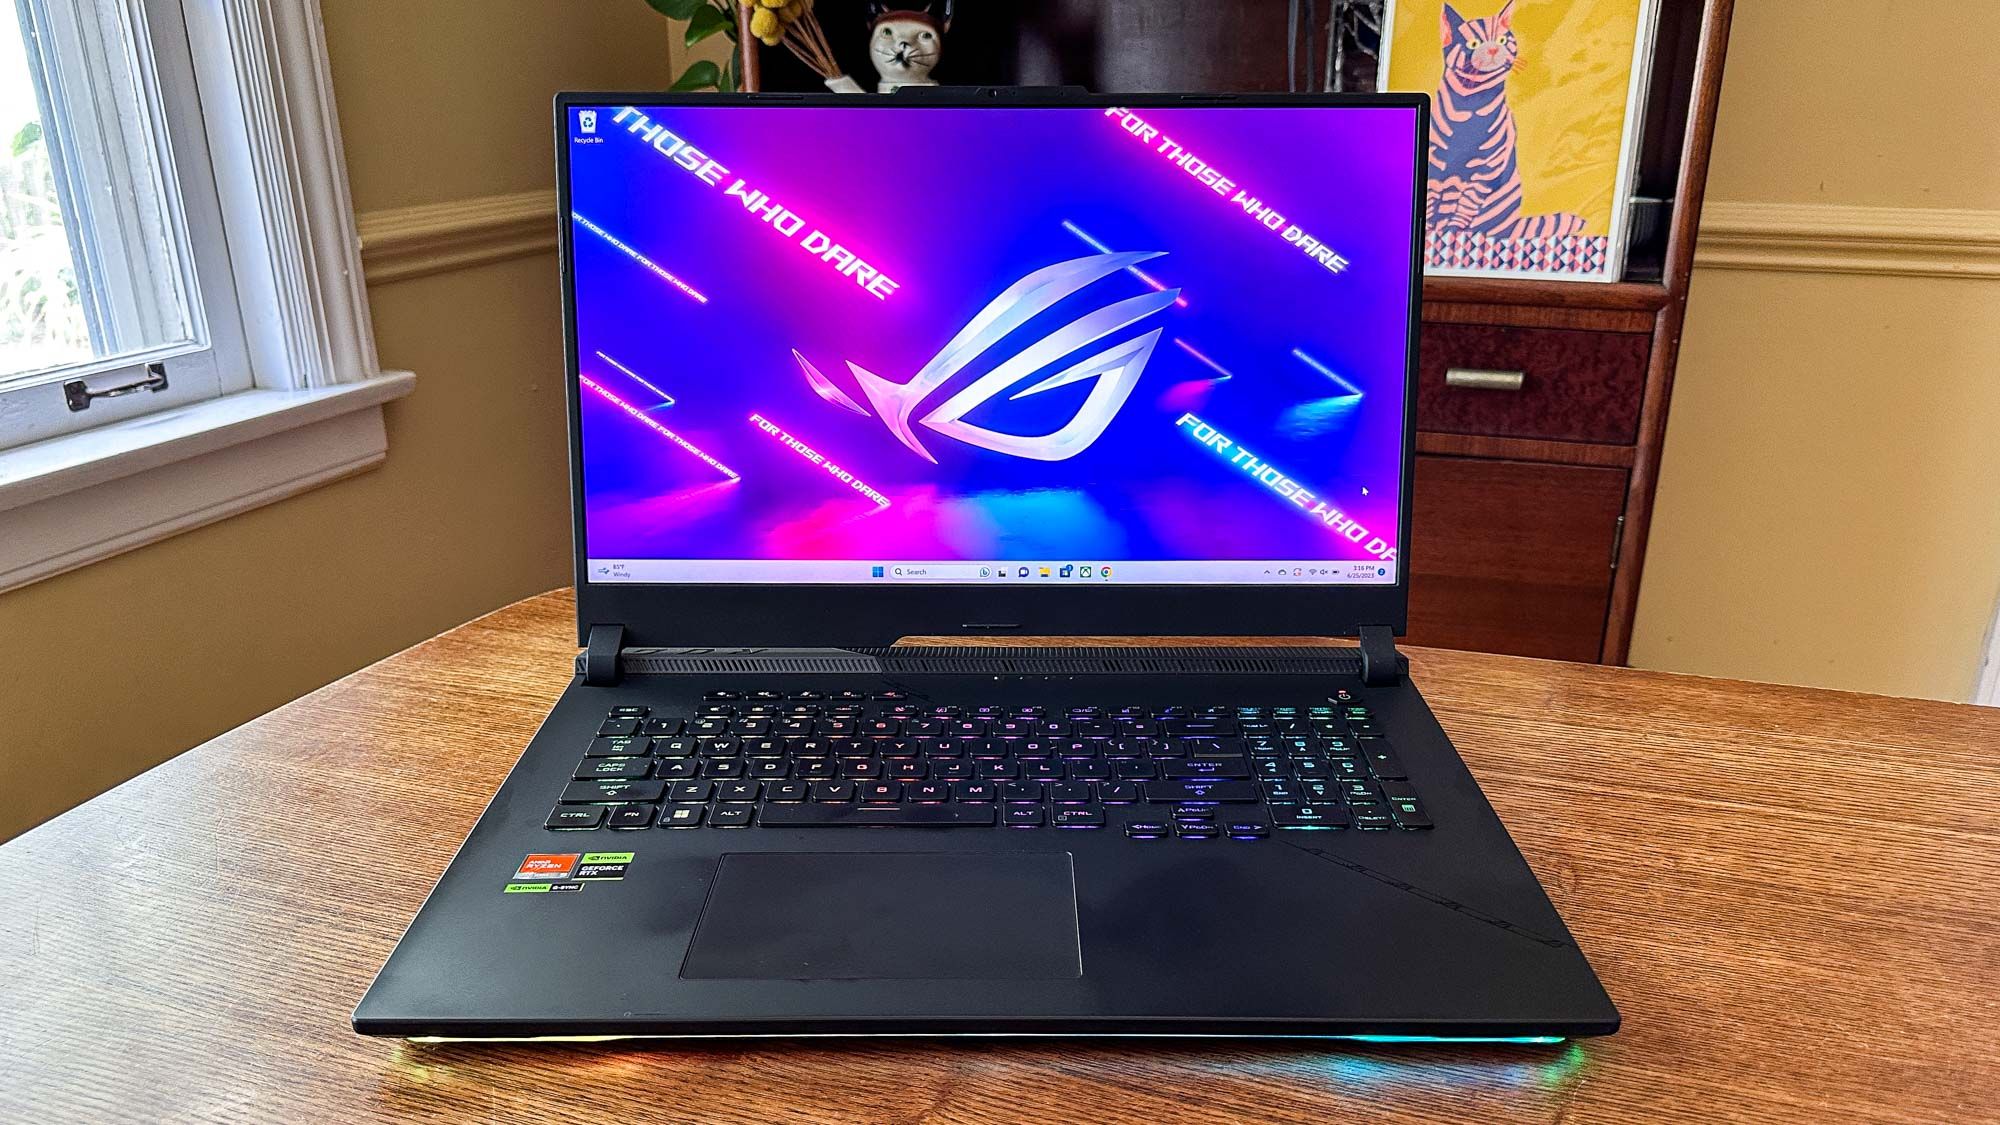 Asus ROG Strix Scar 18 review: the most powerful we've tested so far